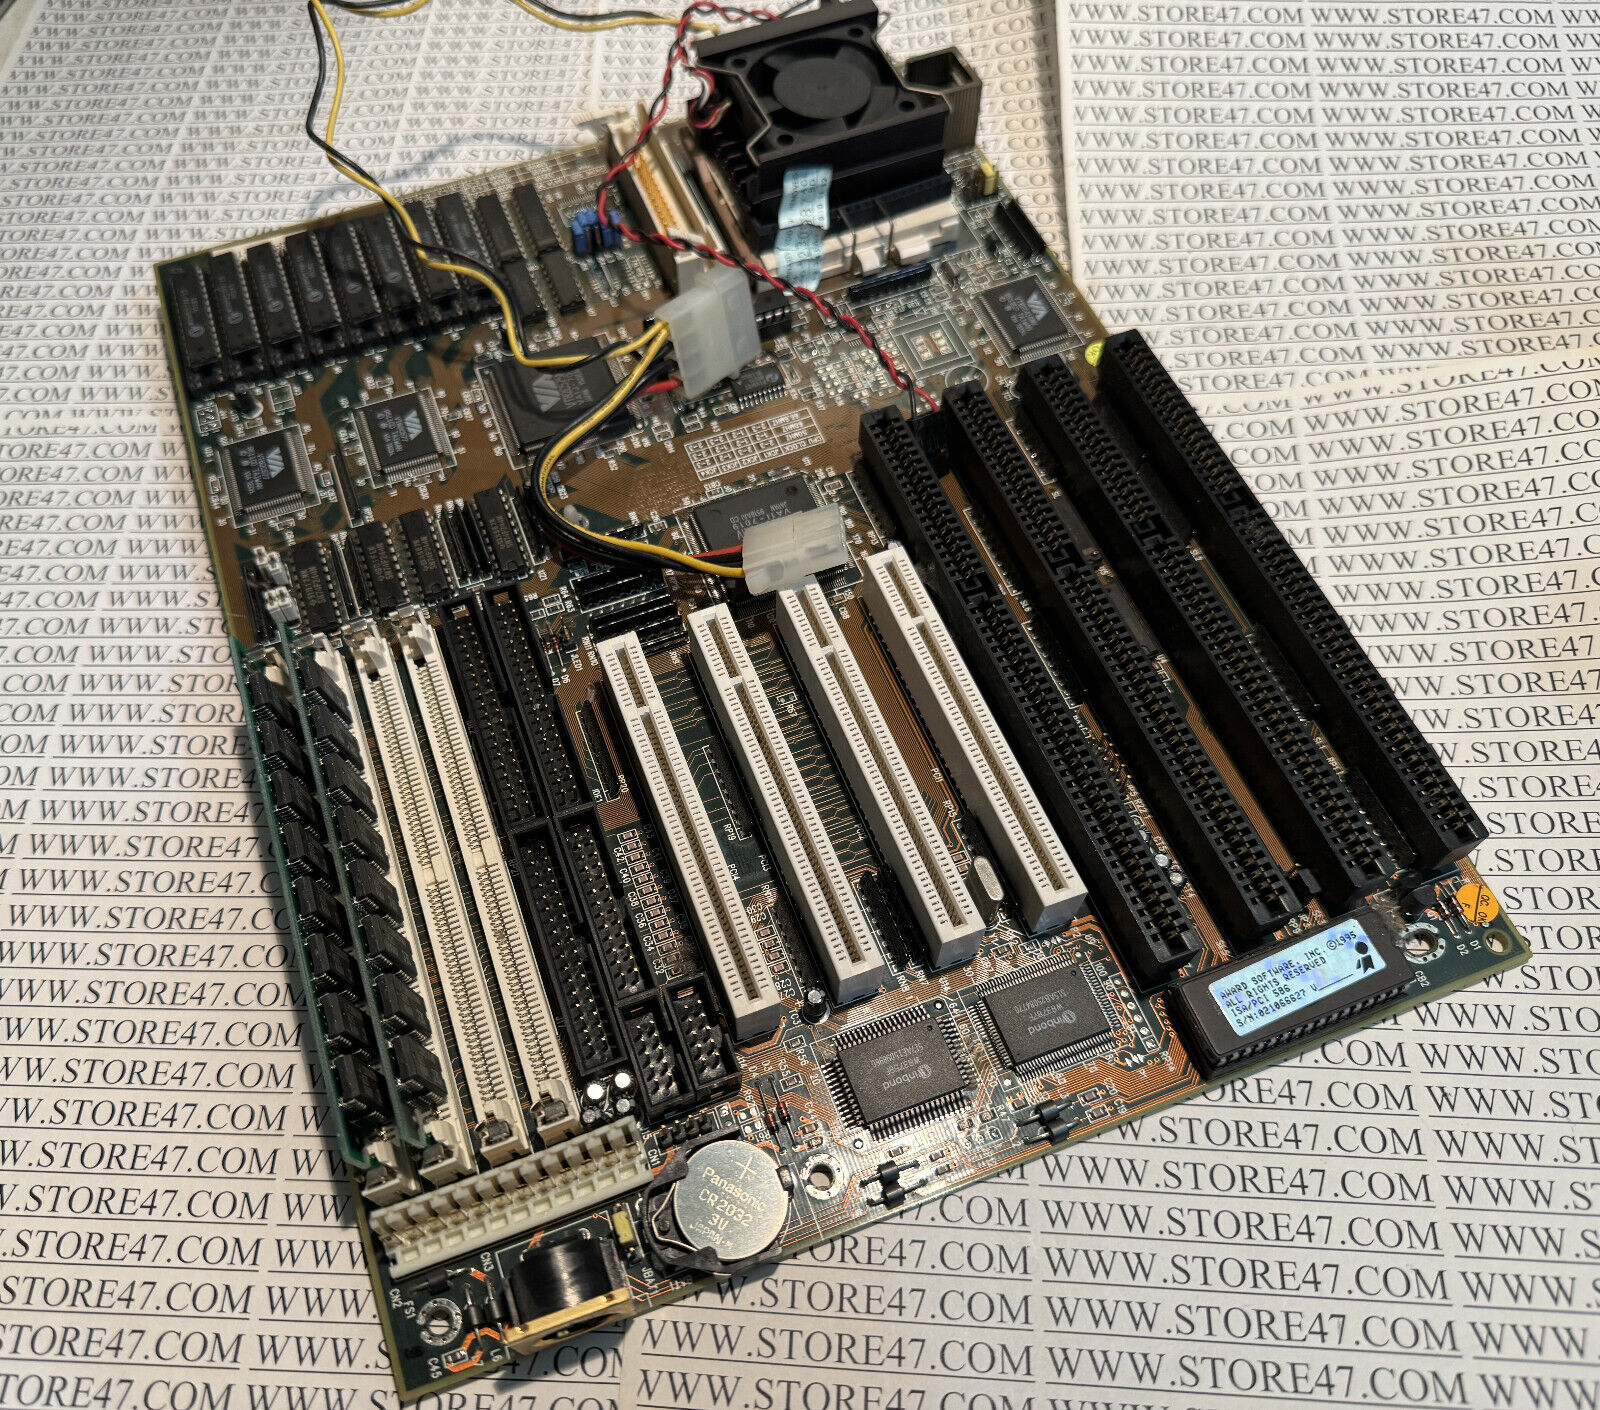 Vintage Intel Pentium 90Mhz Socket 7 Motherboard with 8mb memory and cables